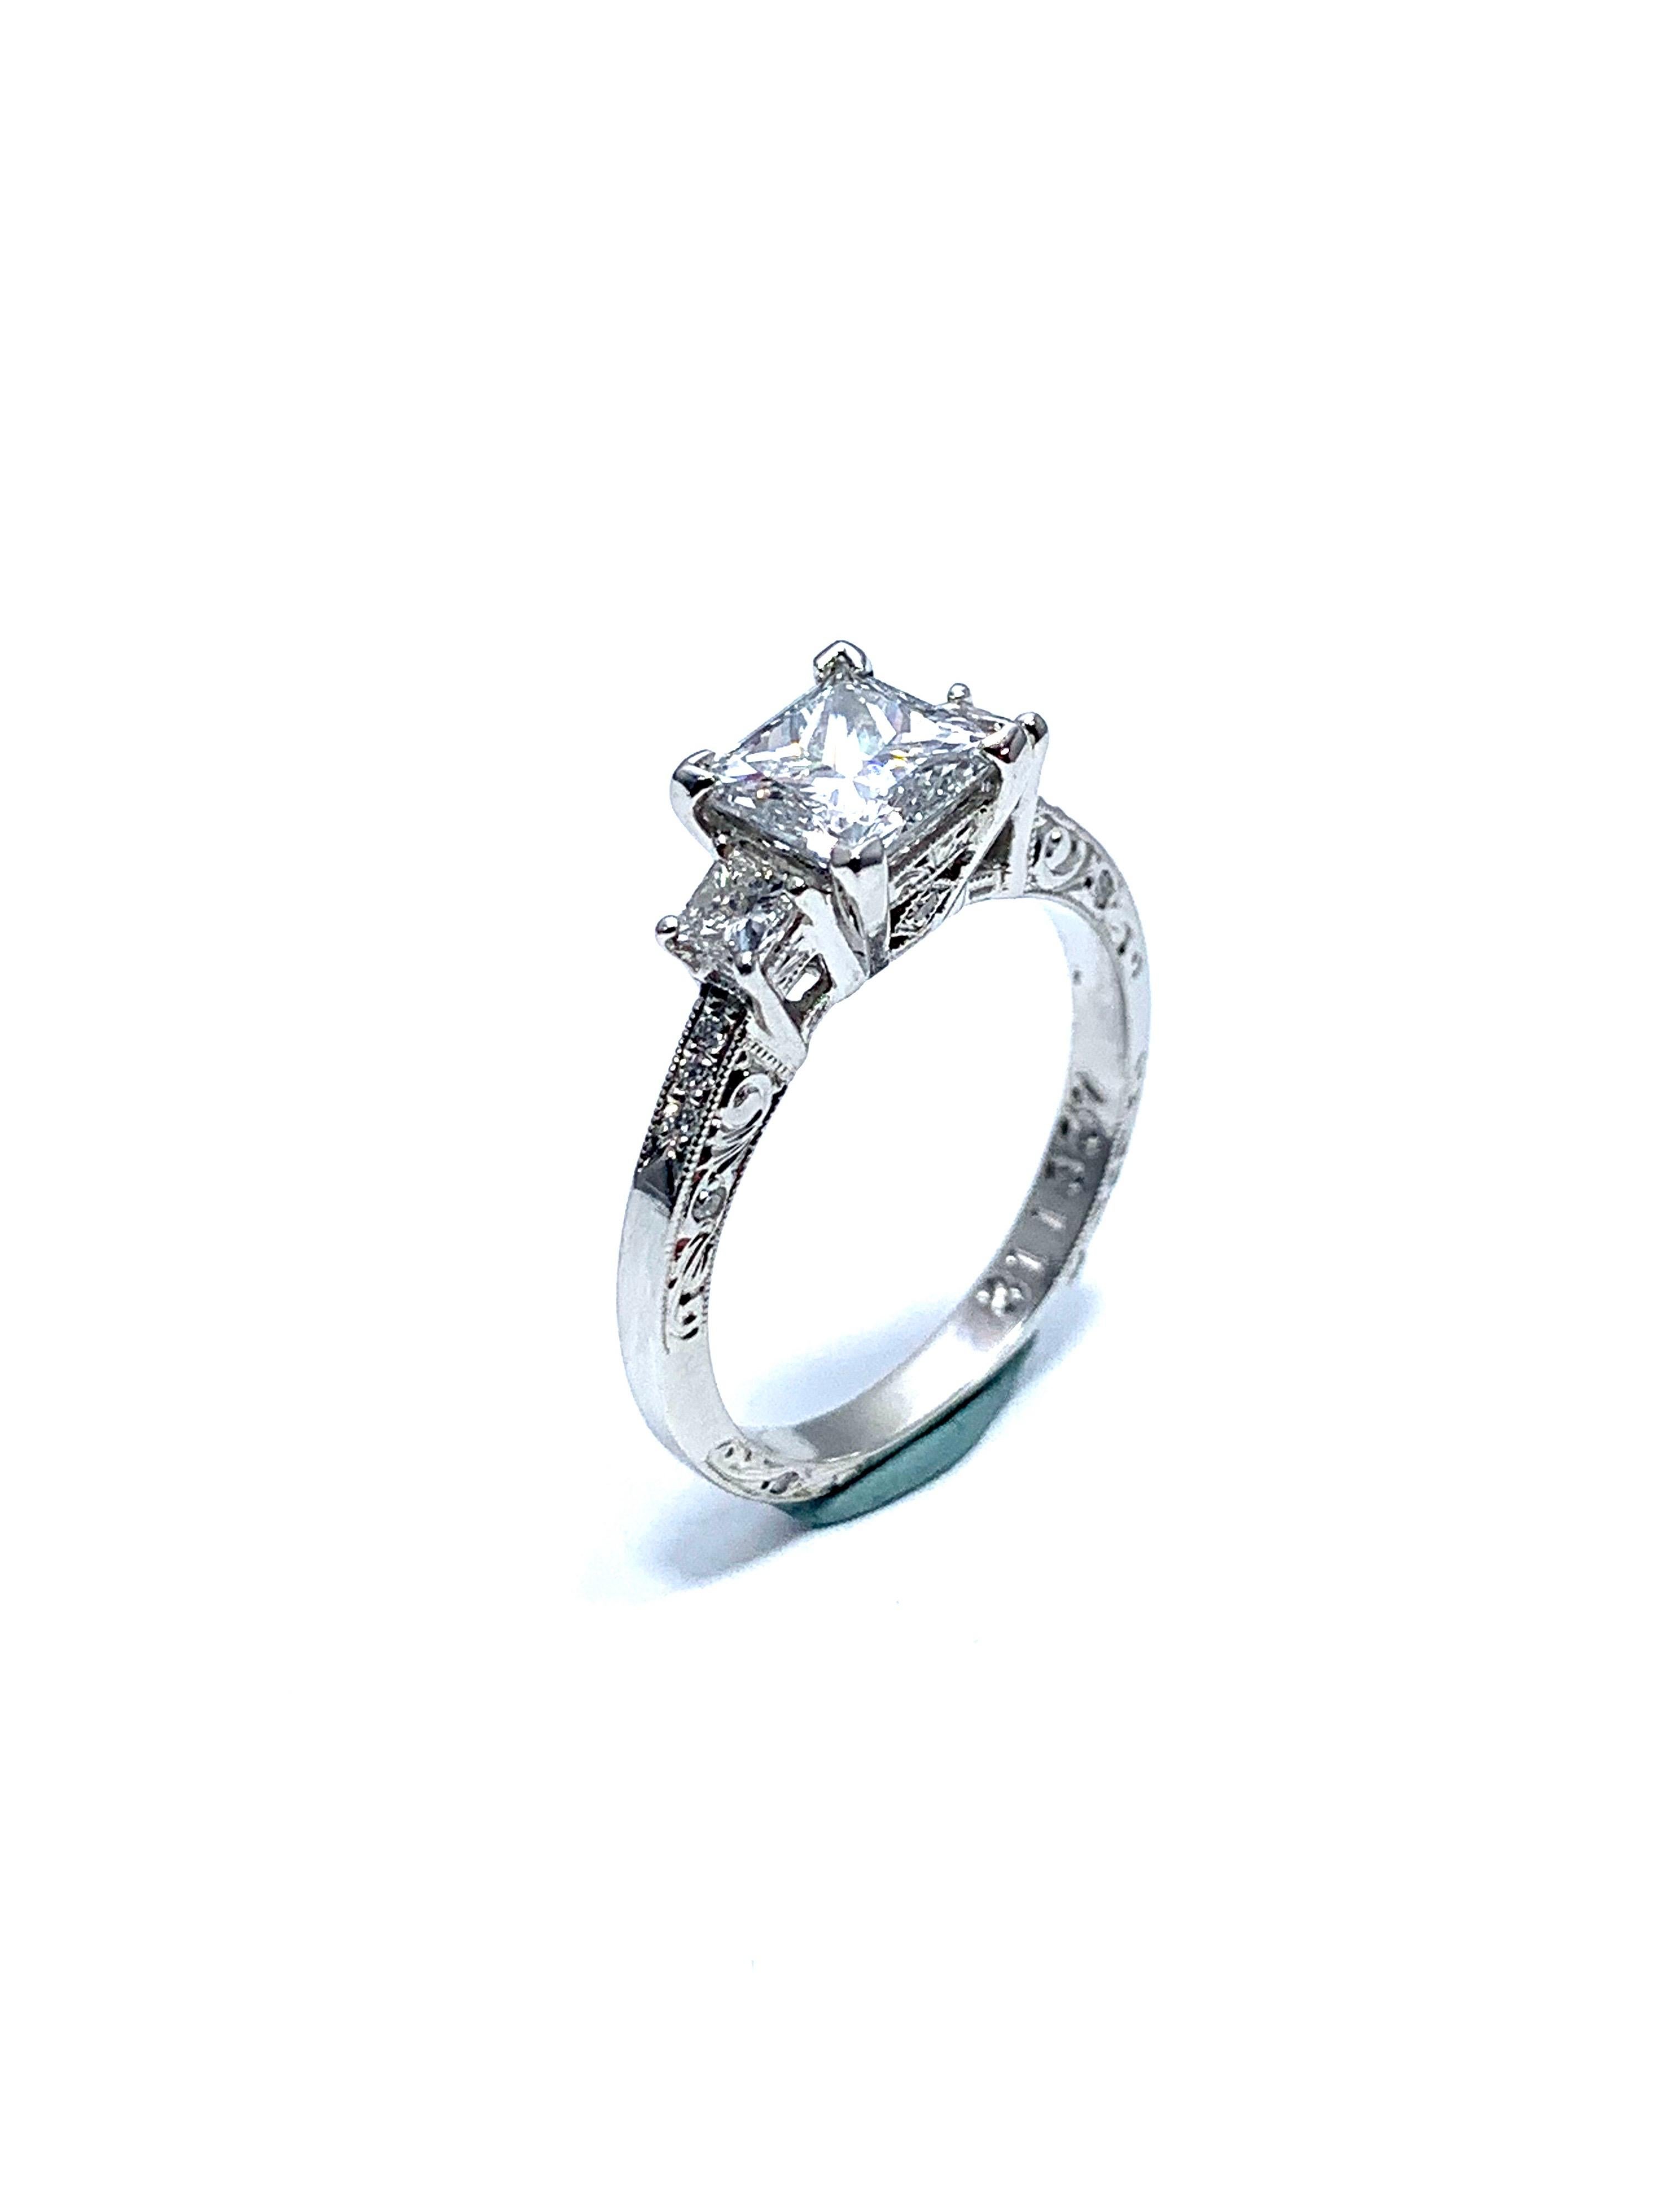 1.19 Carat Princess Cut Diamond and Handcrafted Platinum Engagement Ring For Sale 2